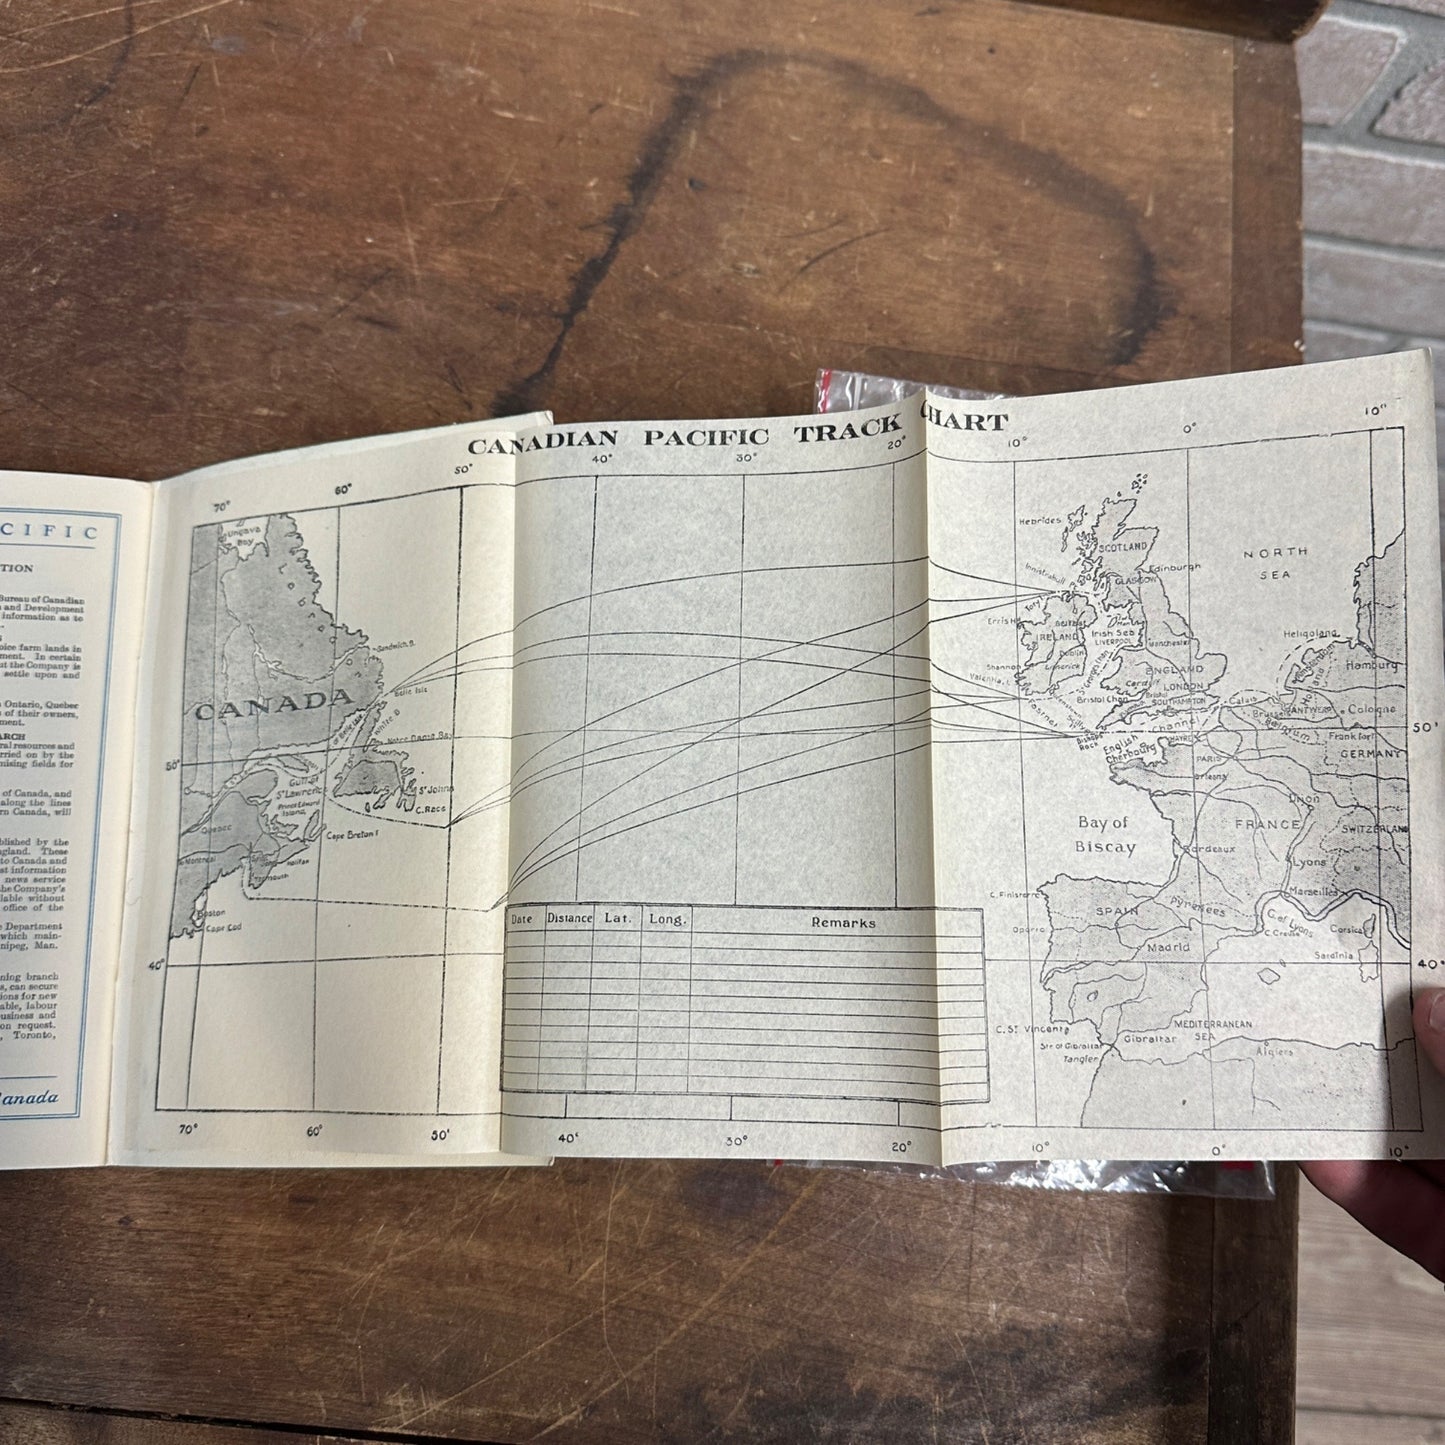 CANADIAN PACIFIC STEAMSHIP SHIP MONTNAIRN LIST OF PASSANGERS BOOK W/ MAP